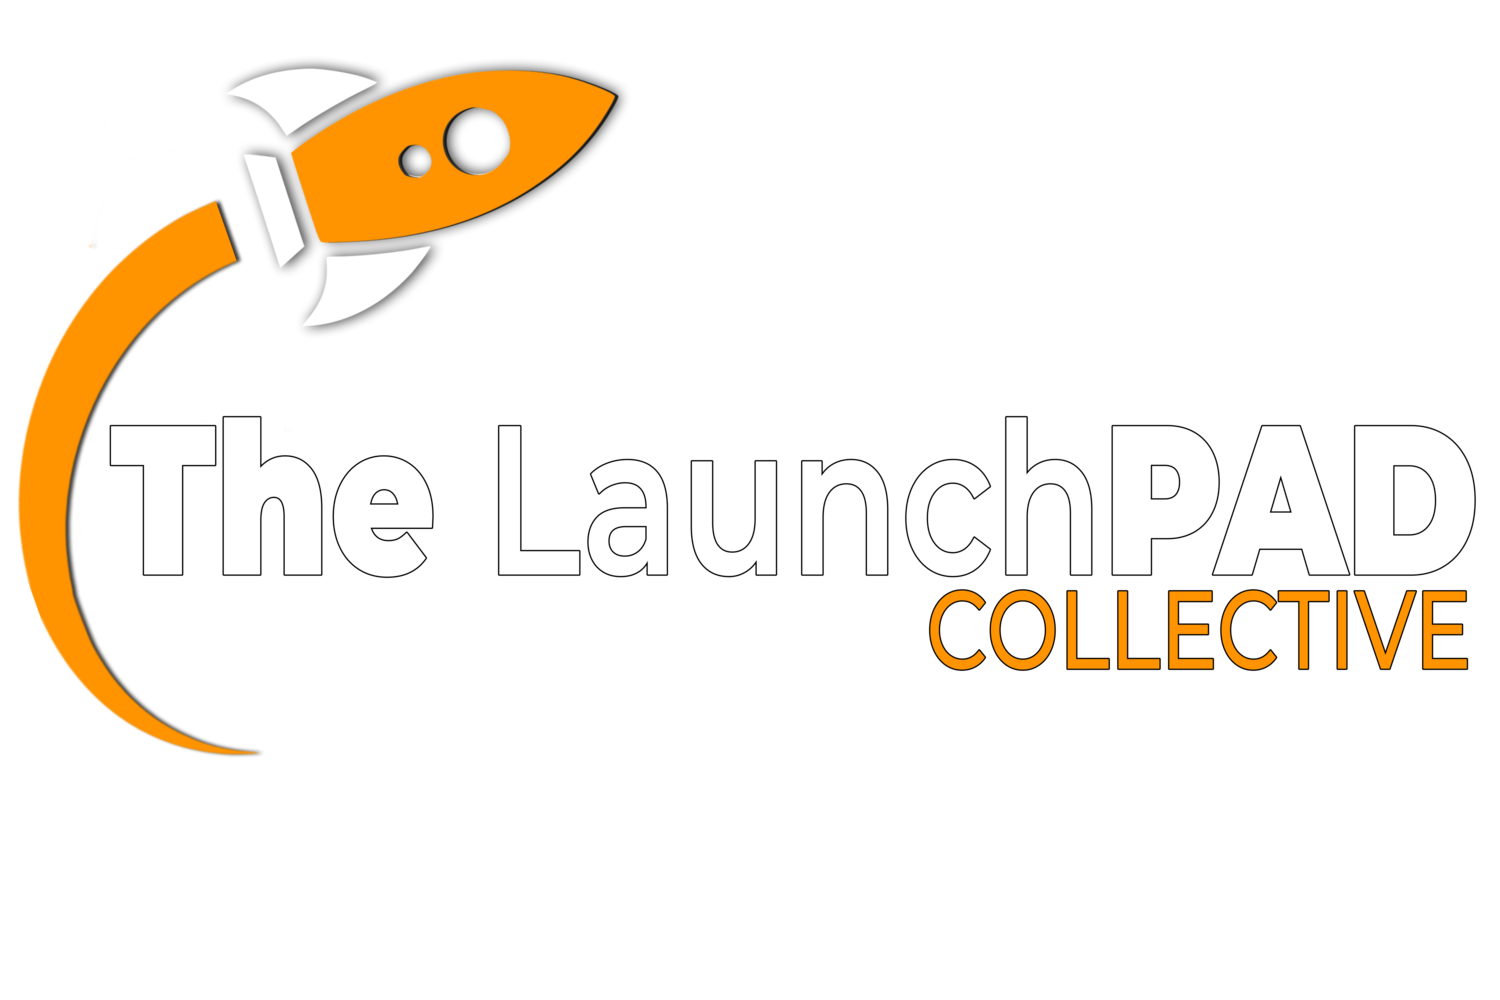 The LaunchPad Collective